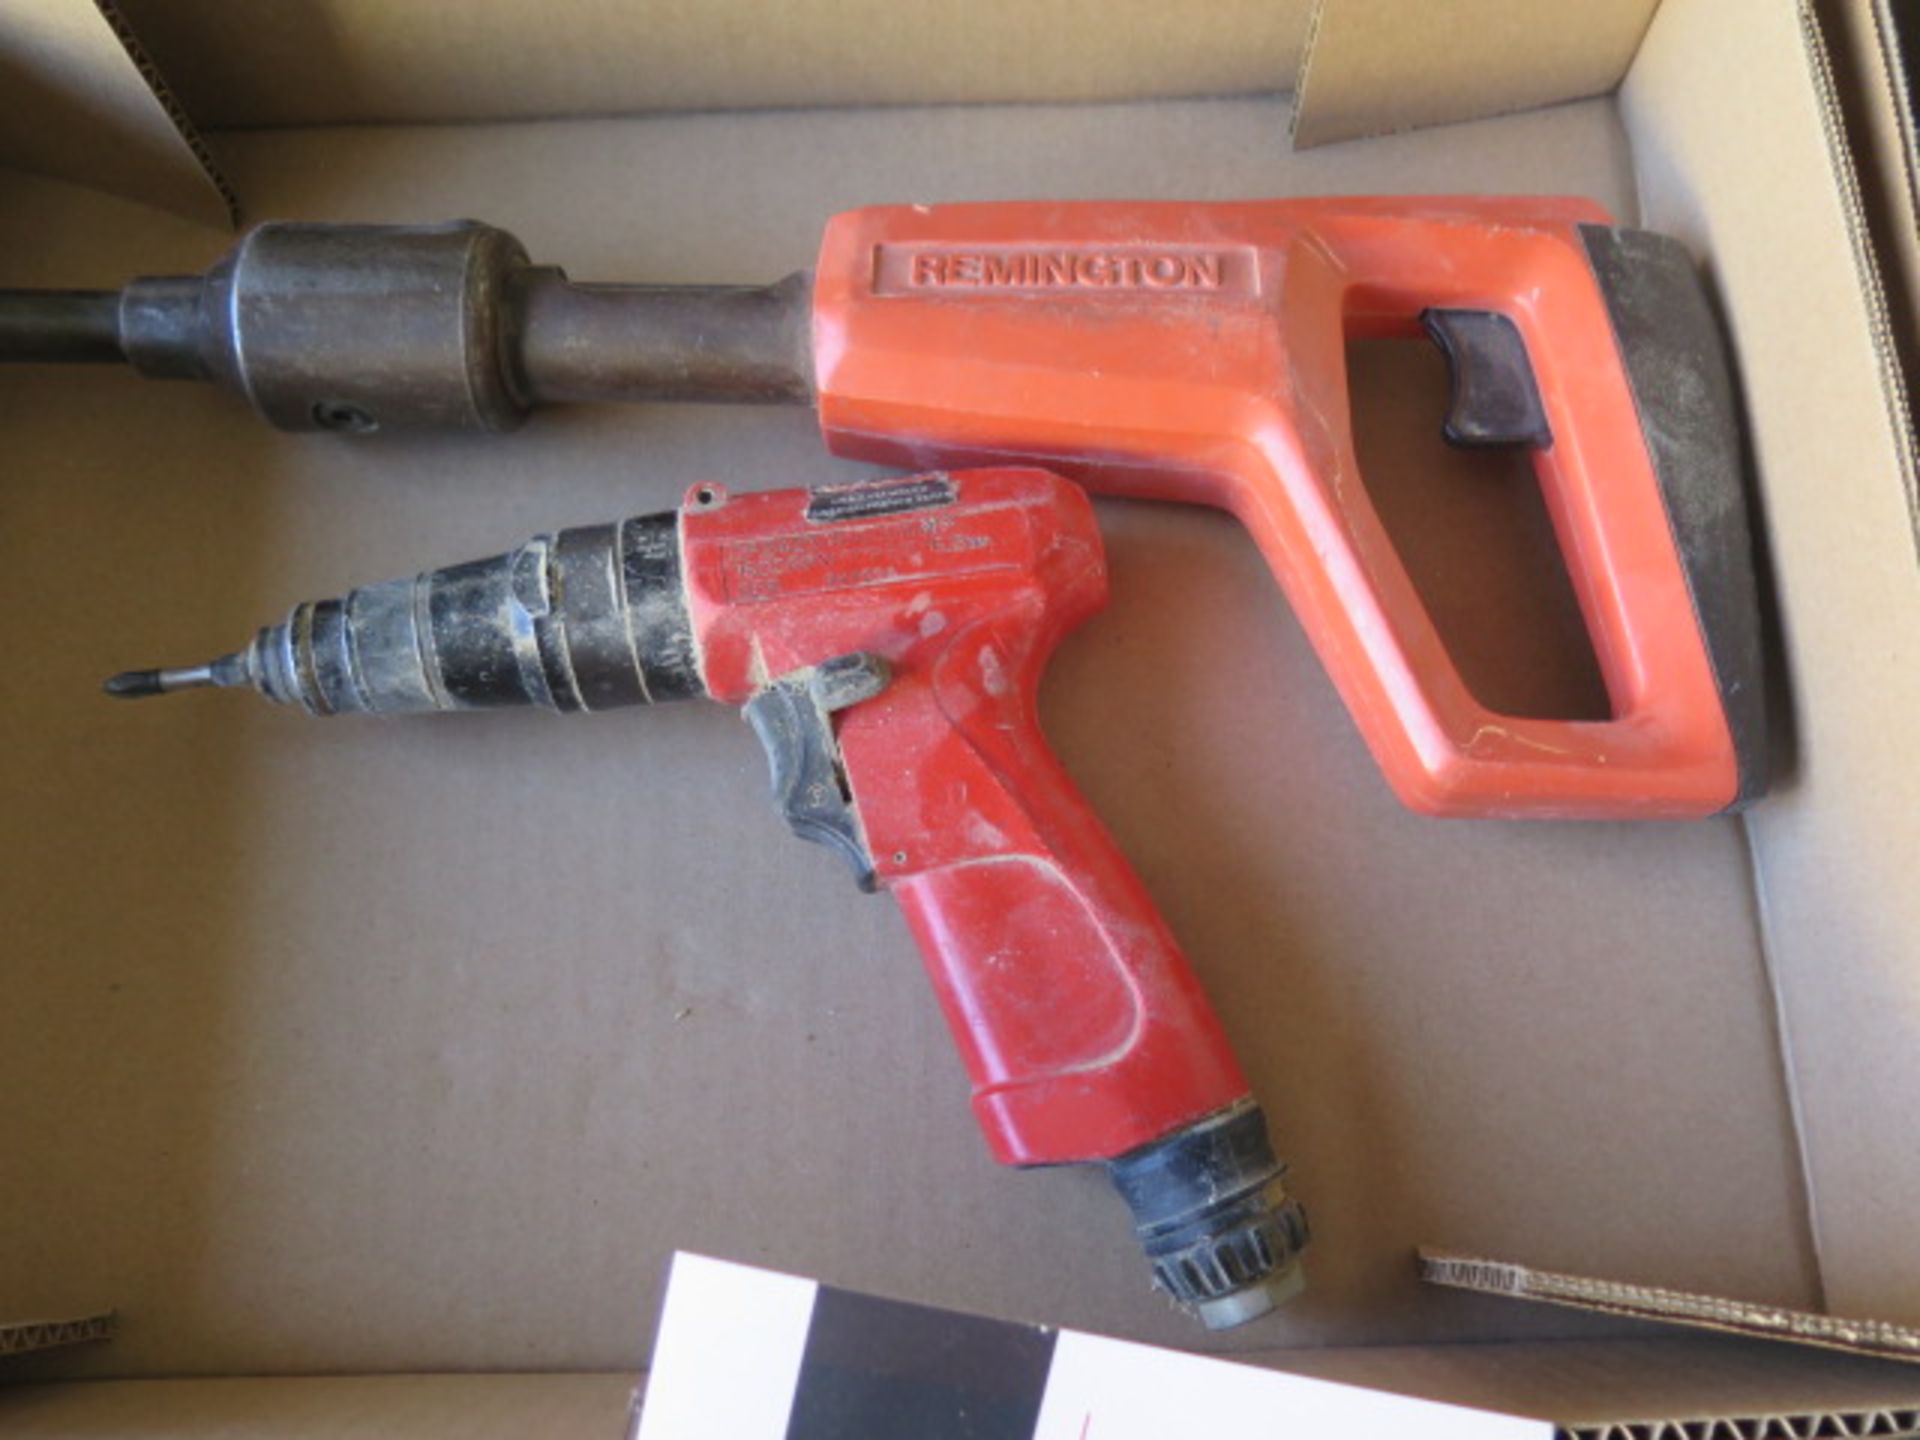 Remington Powder Shot Tool and Chicago Pneumatic Nut Driver (SOLD AS-IS - NO WARRANTY) - Image 4 of 4